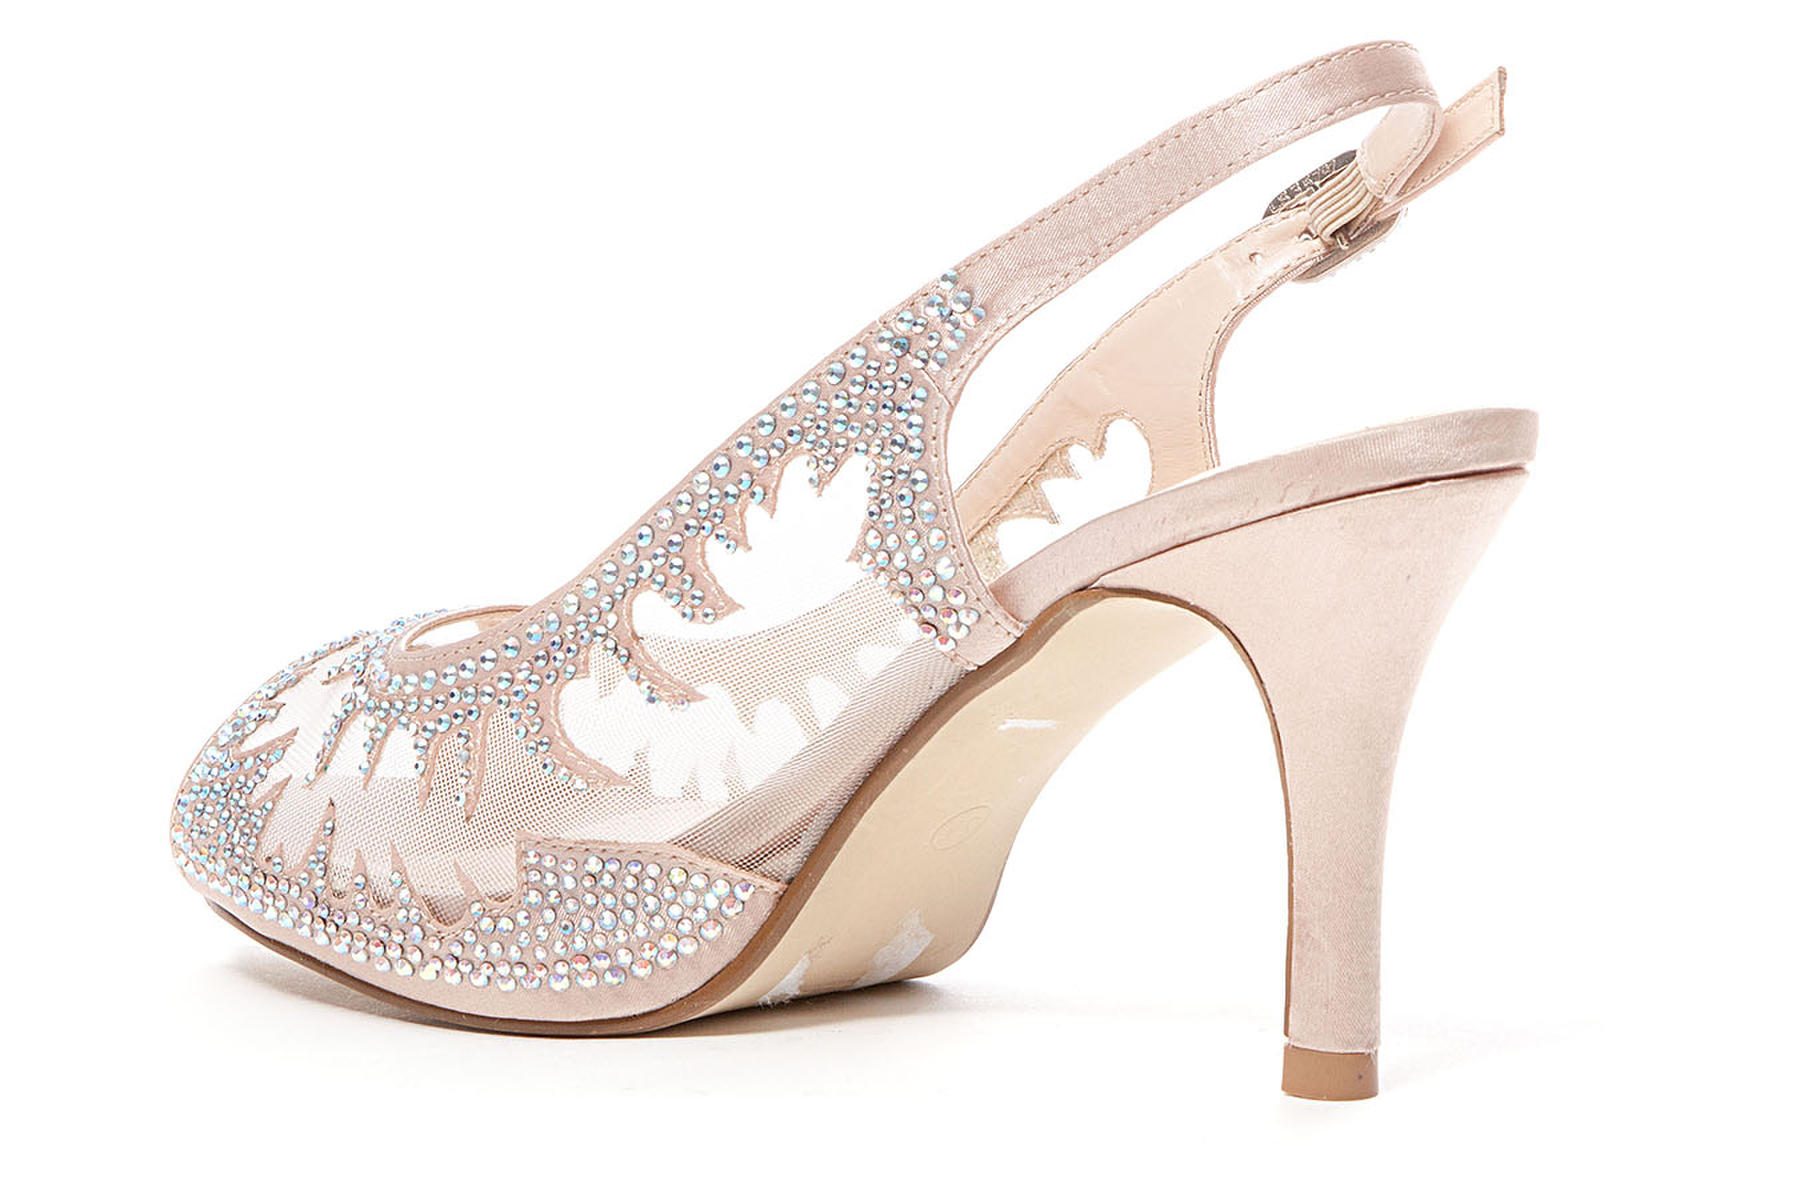 silver quinceanera shoes